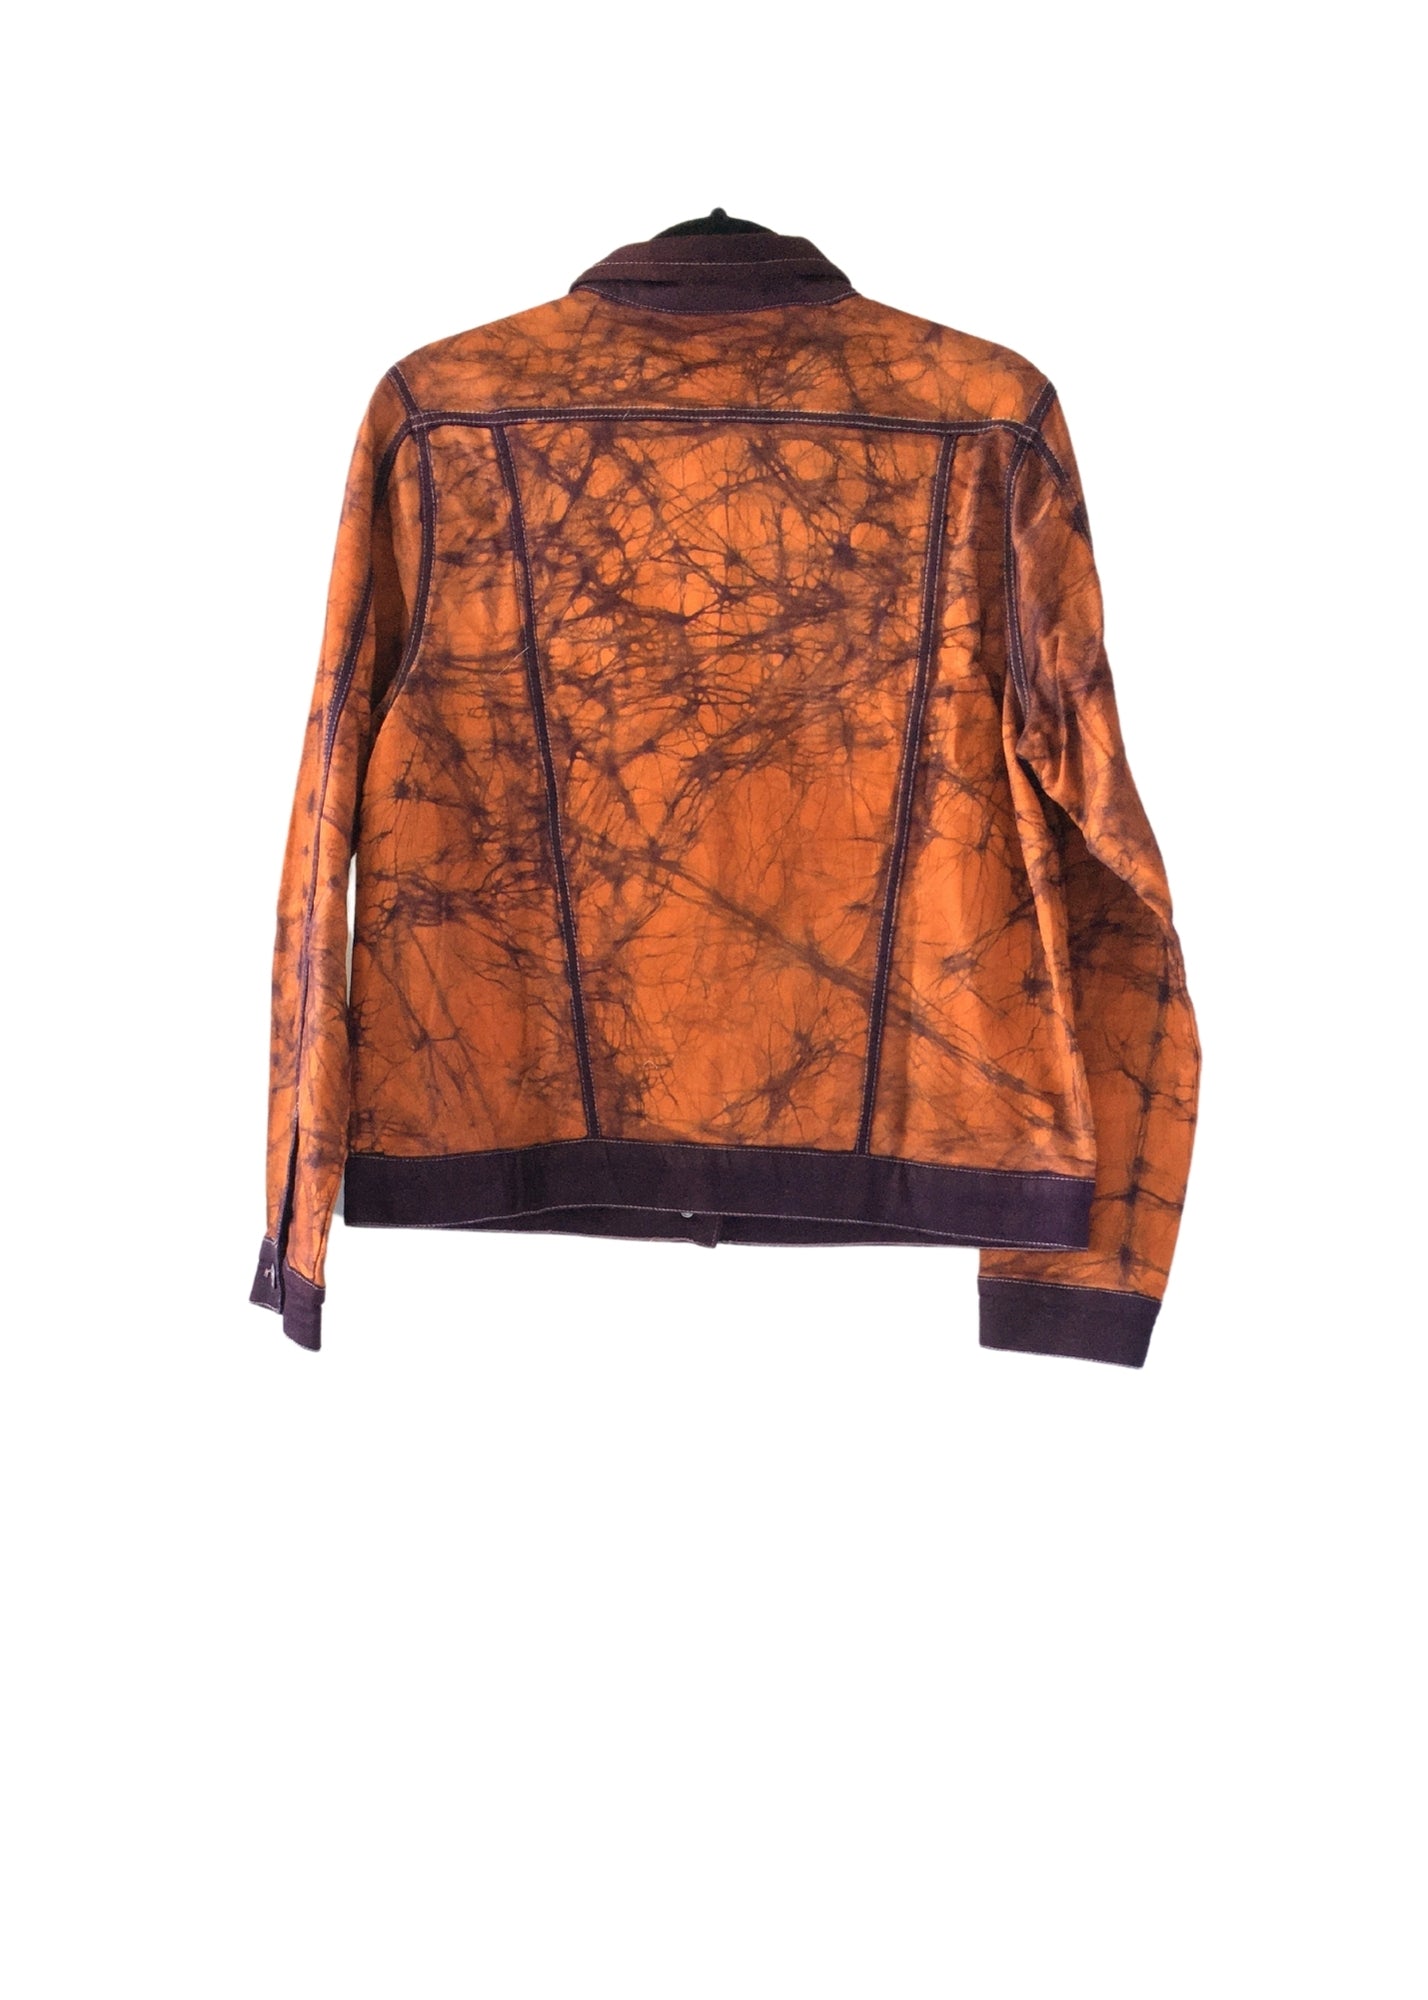 Linen Lightweight Batik Trucker Jacket Orange and Purple -Contemporary and Colorful Ensemble-African apparel and accessories